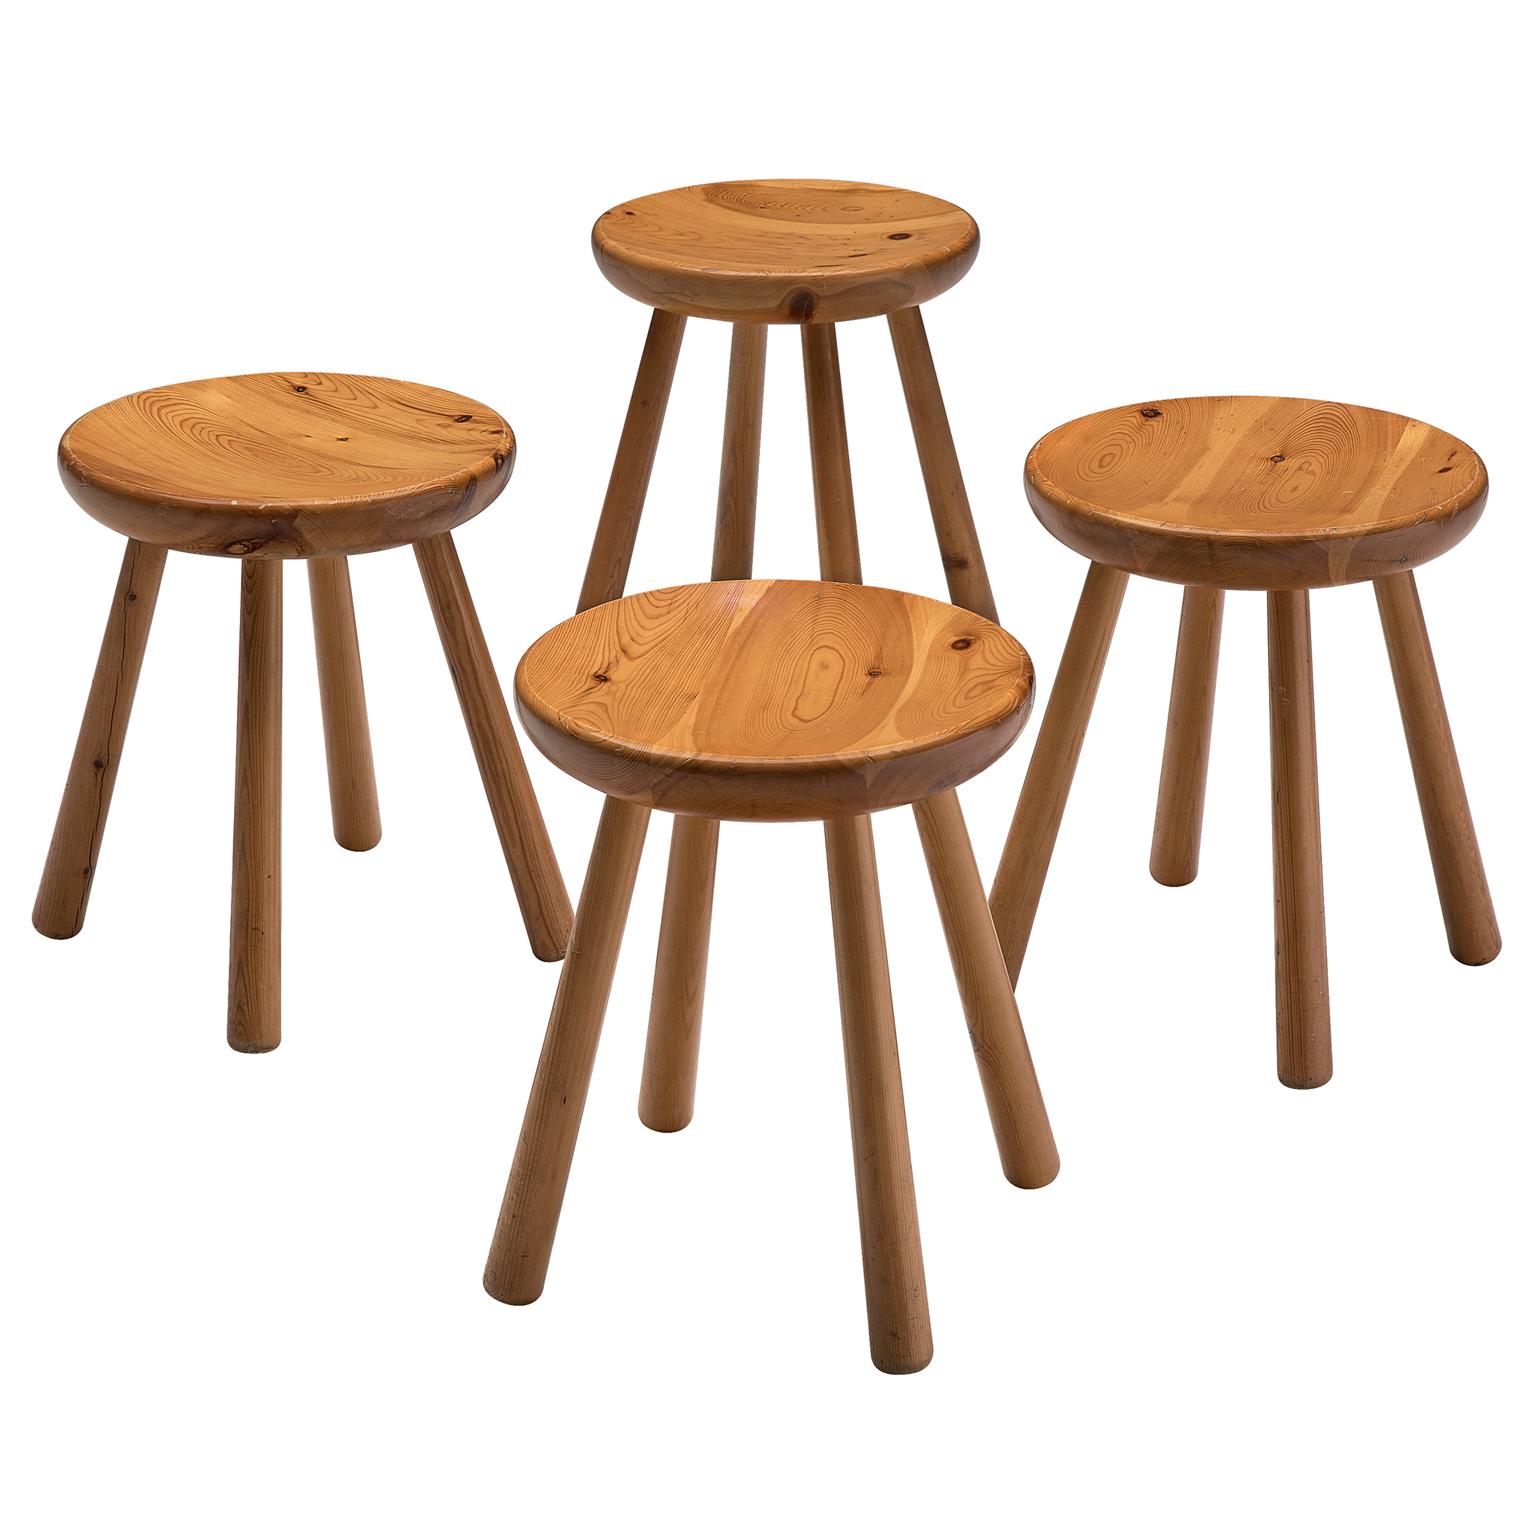 Two stools in Solid Pine